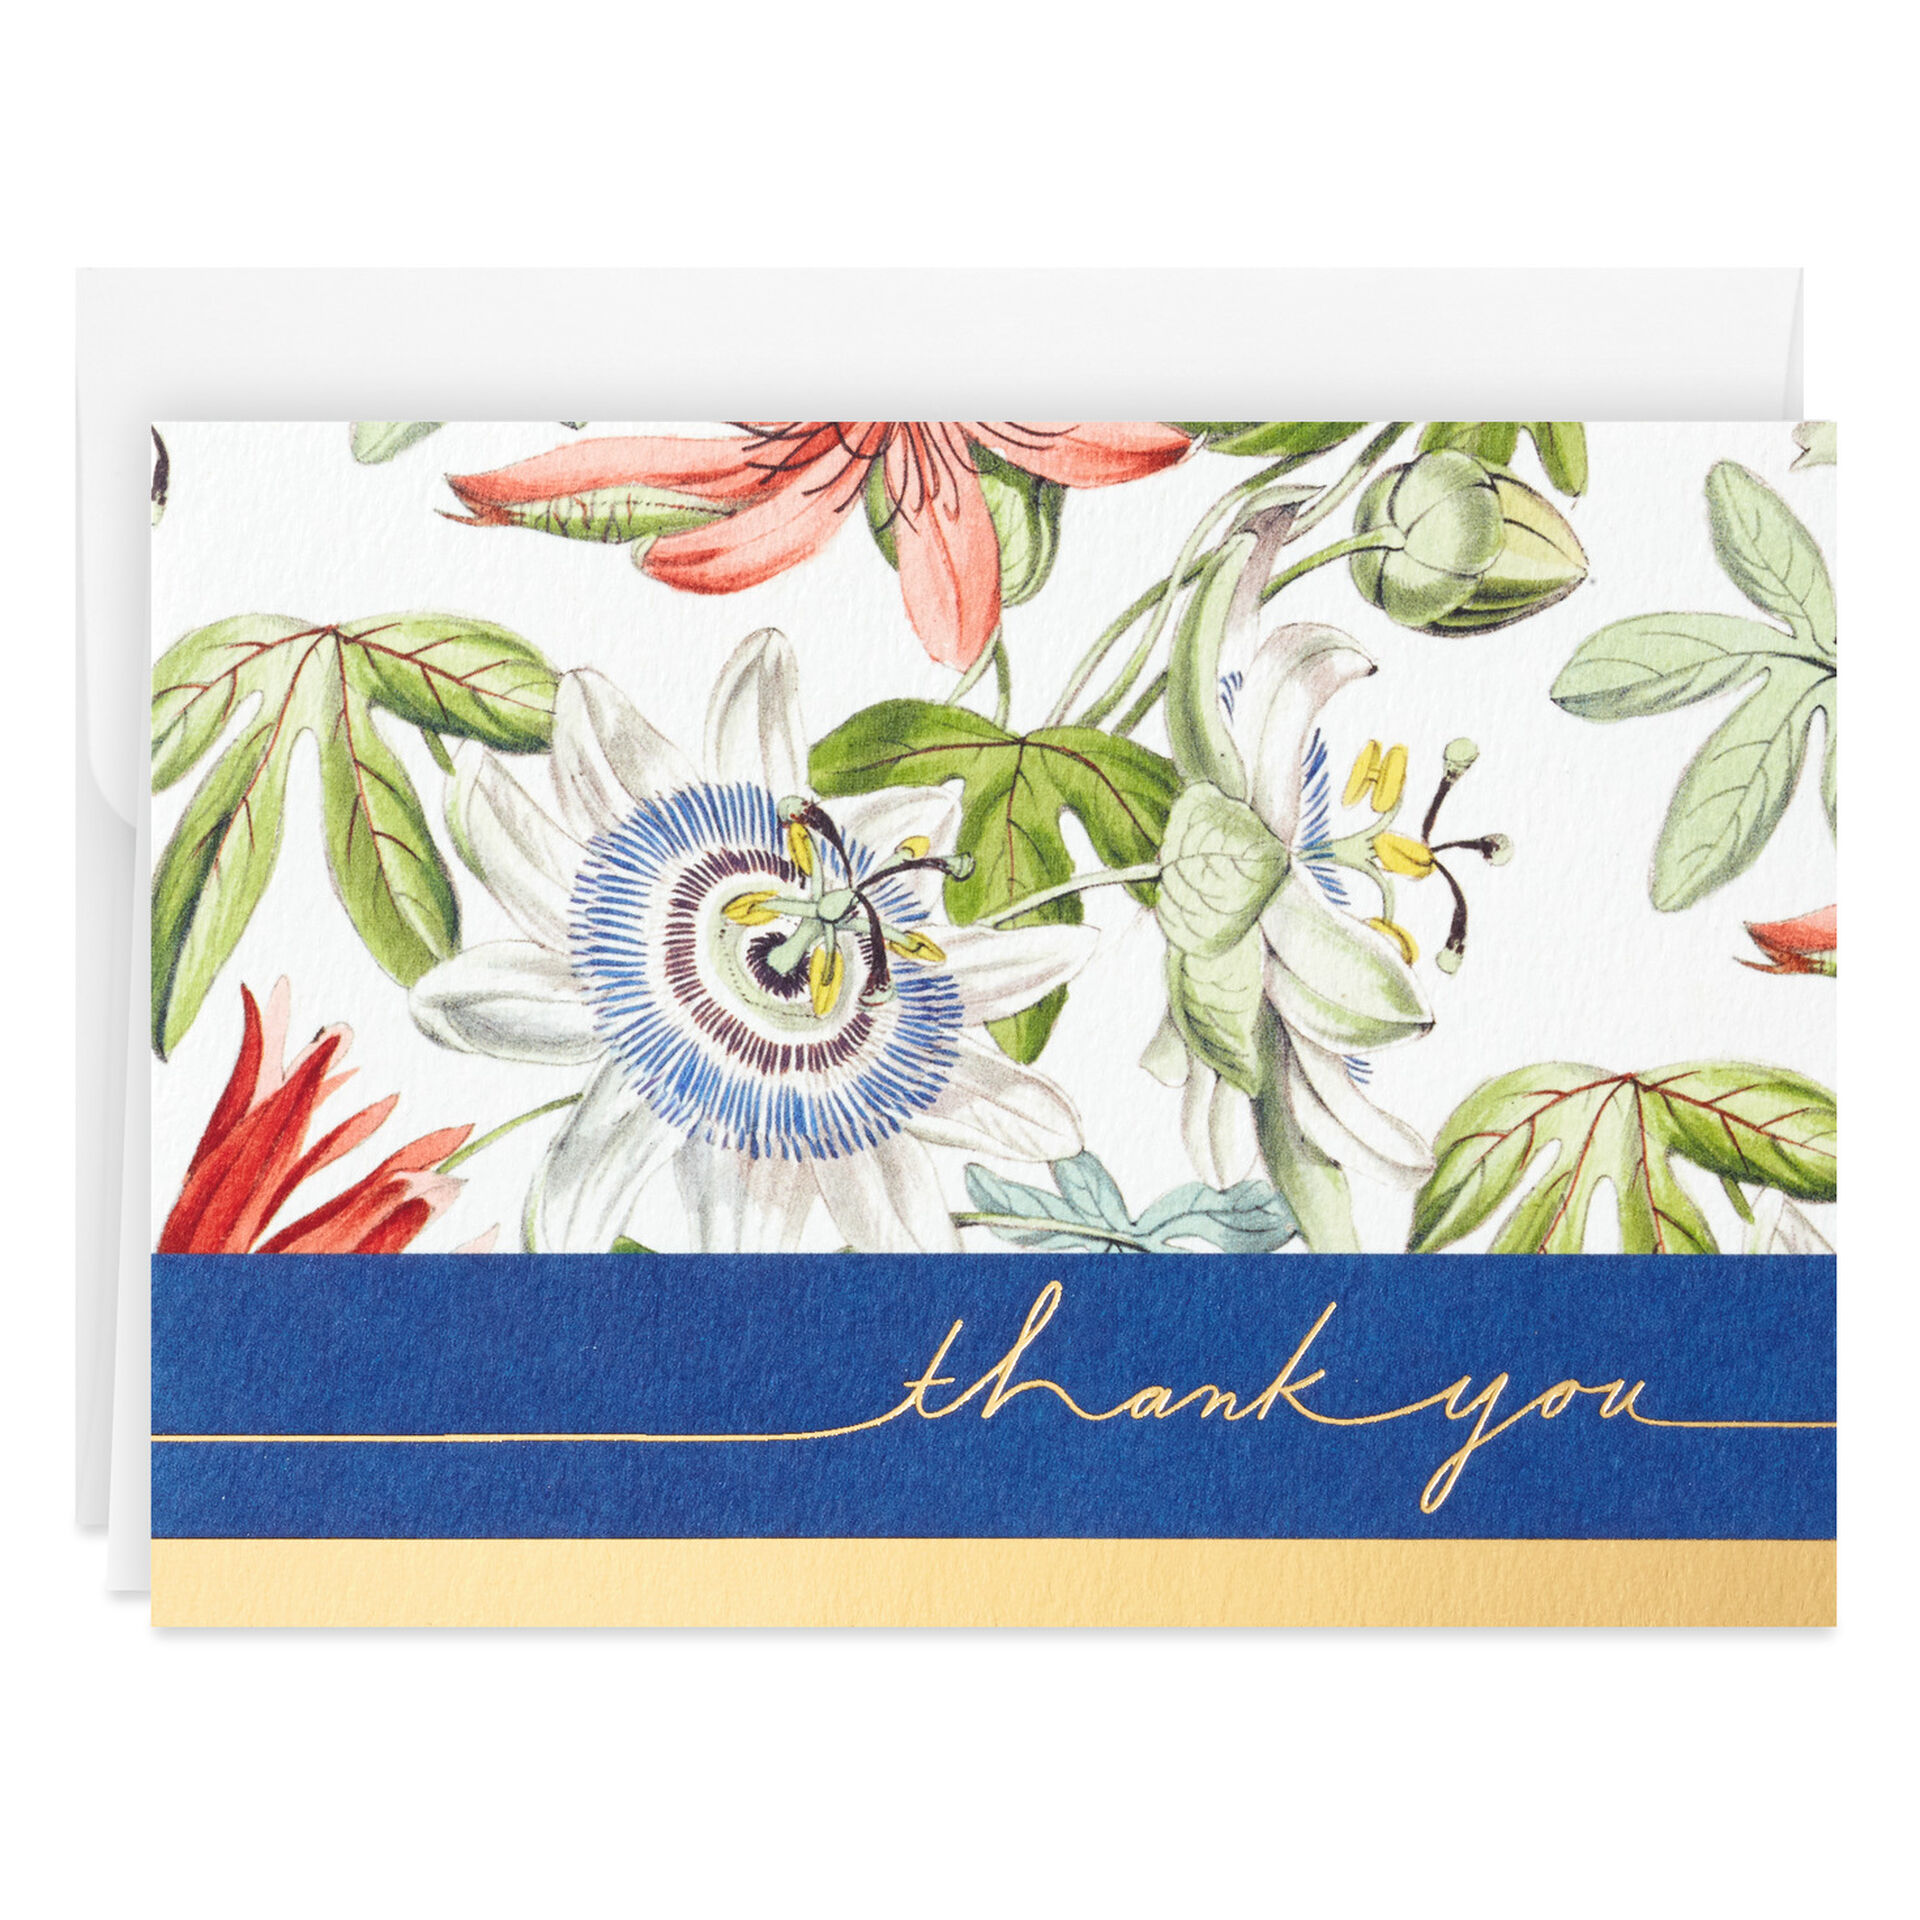 Flowers-on-Navy-Boxed-Blank-ThankYou-Notes-Multipack_1TYN2441_02